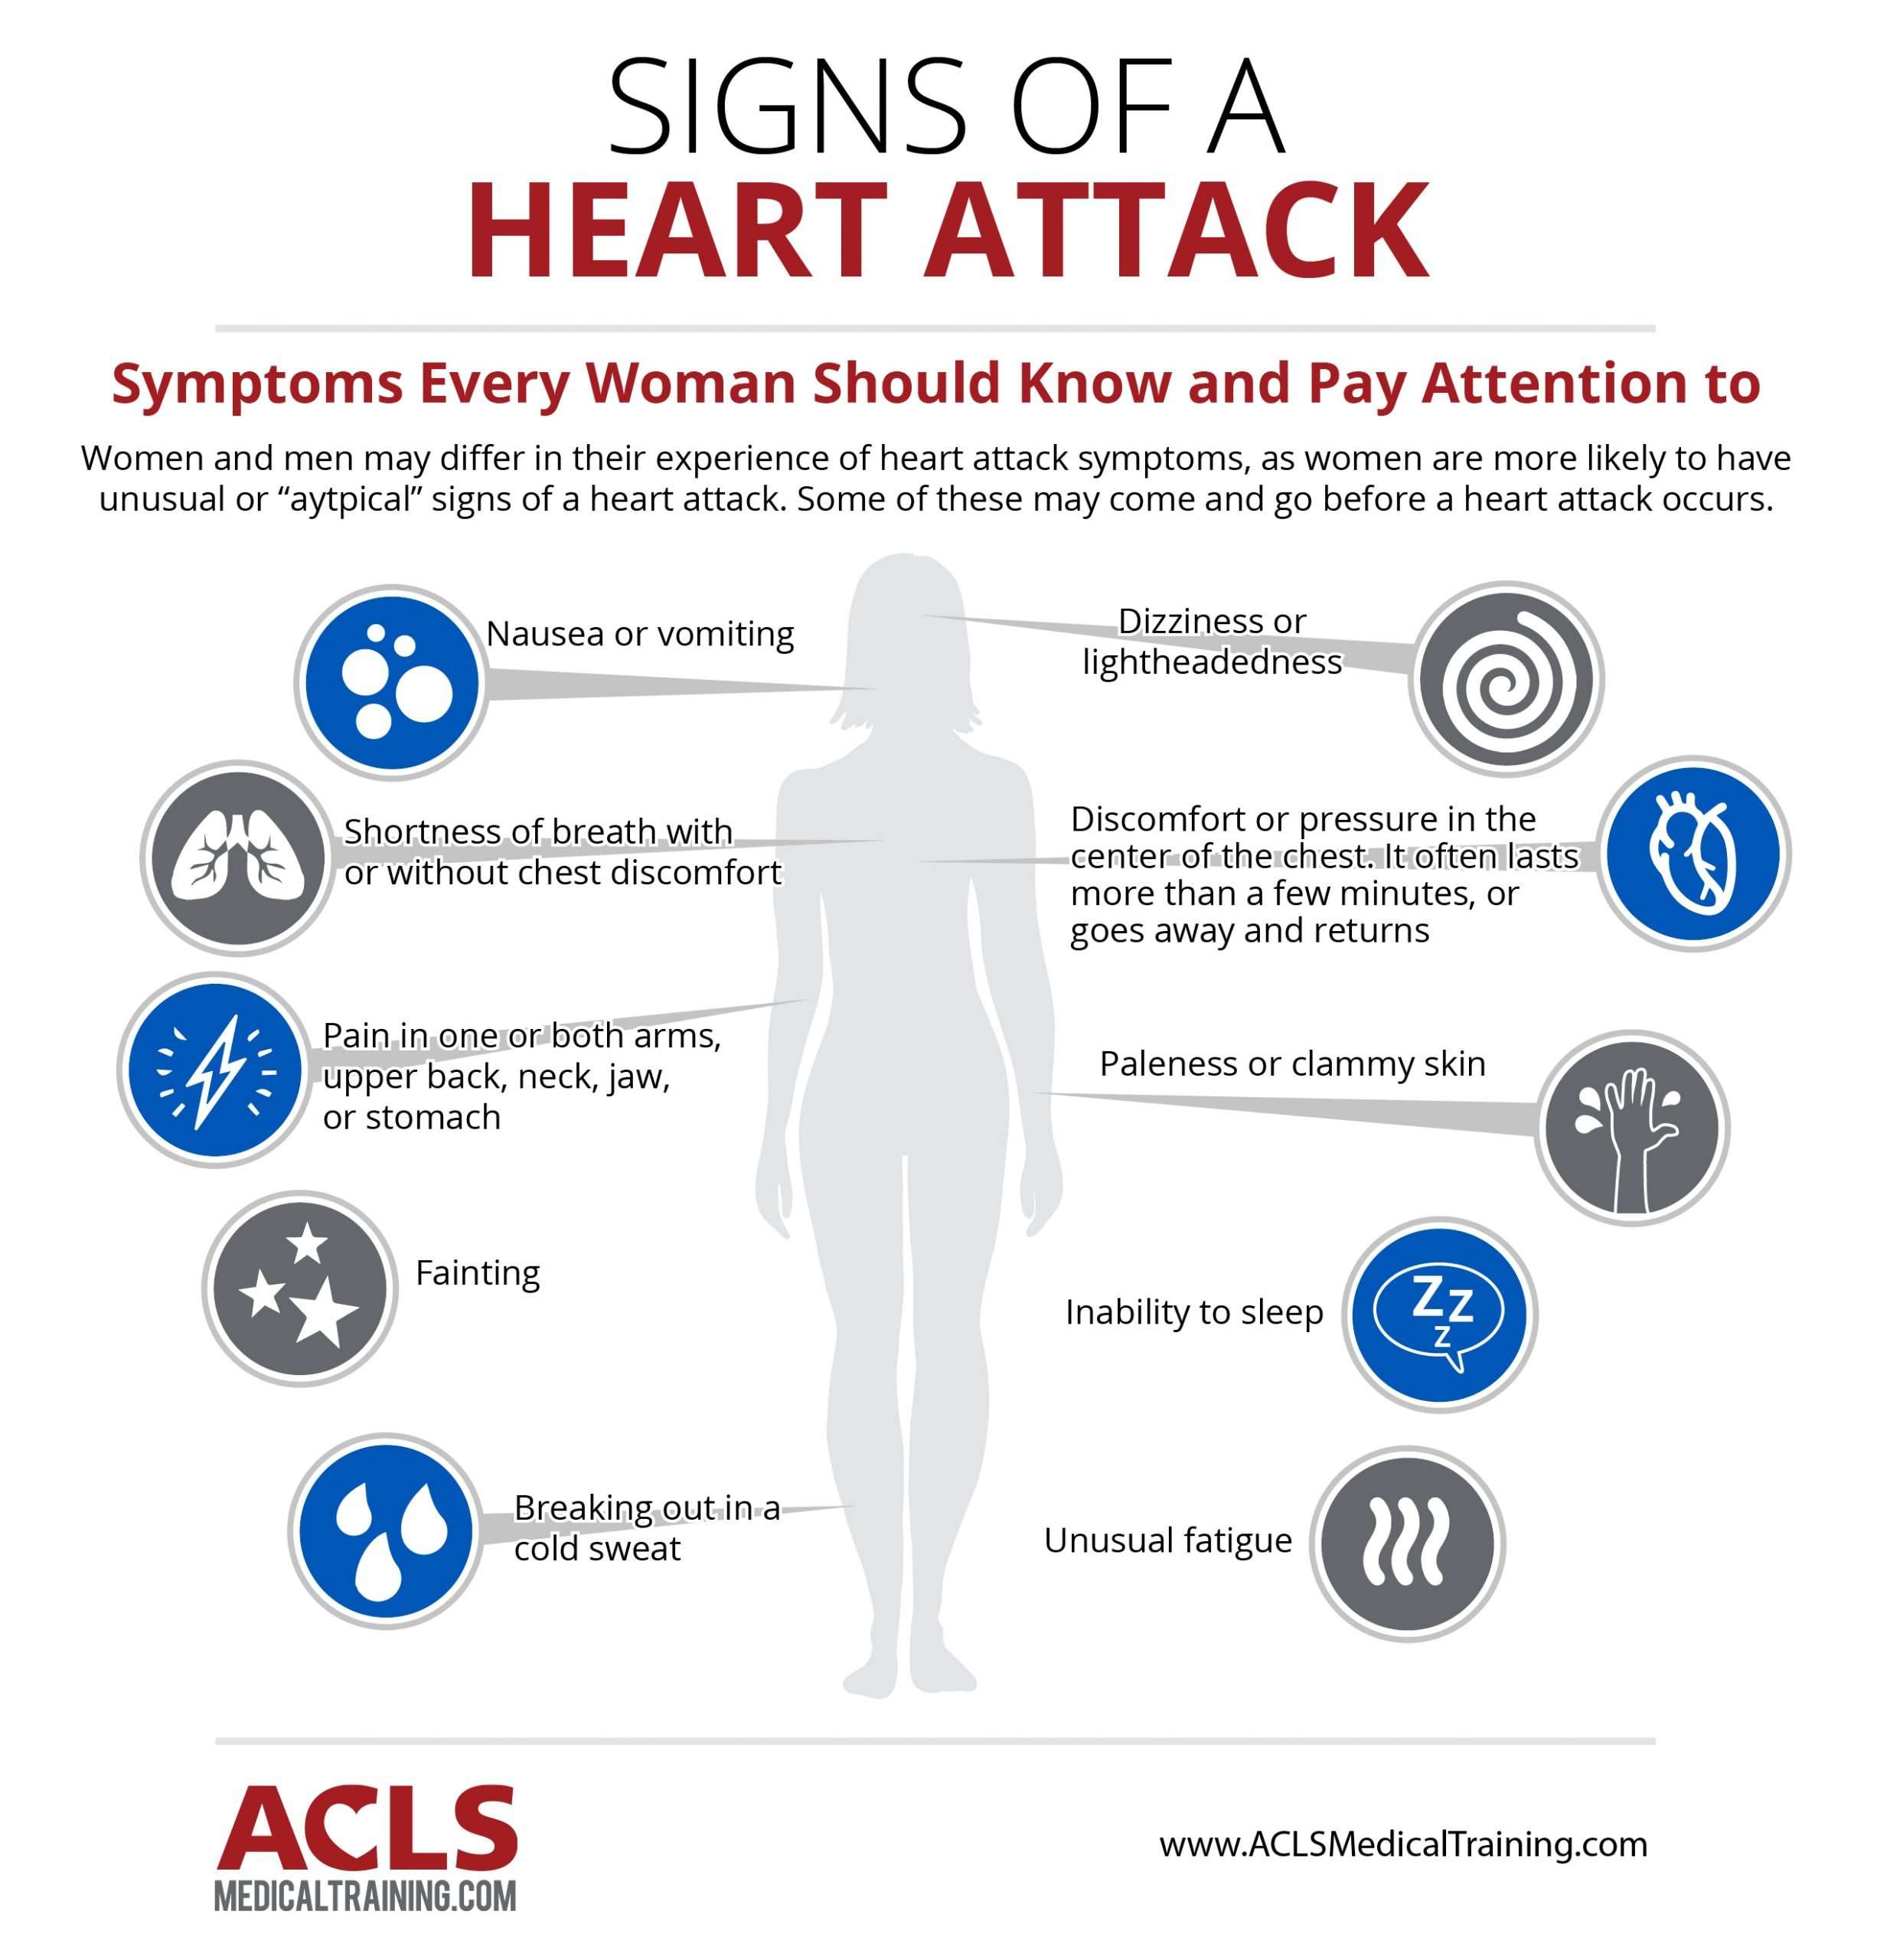 A Womanâs Heart Attack: Why and How It Is Different than a ...